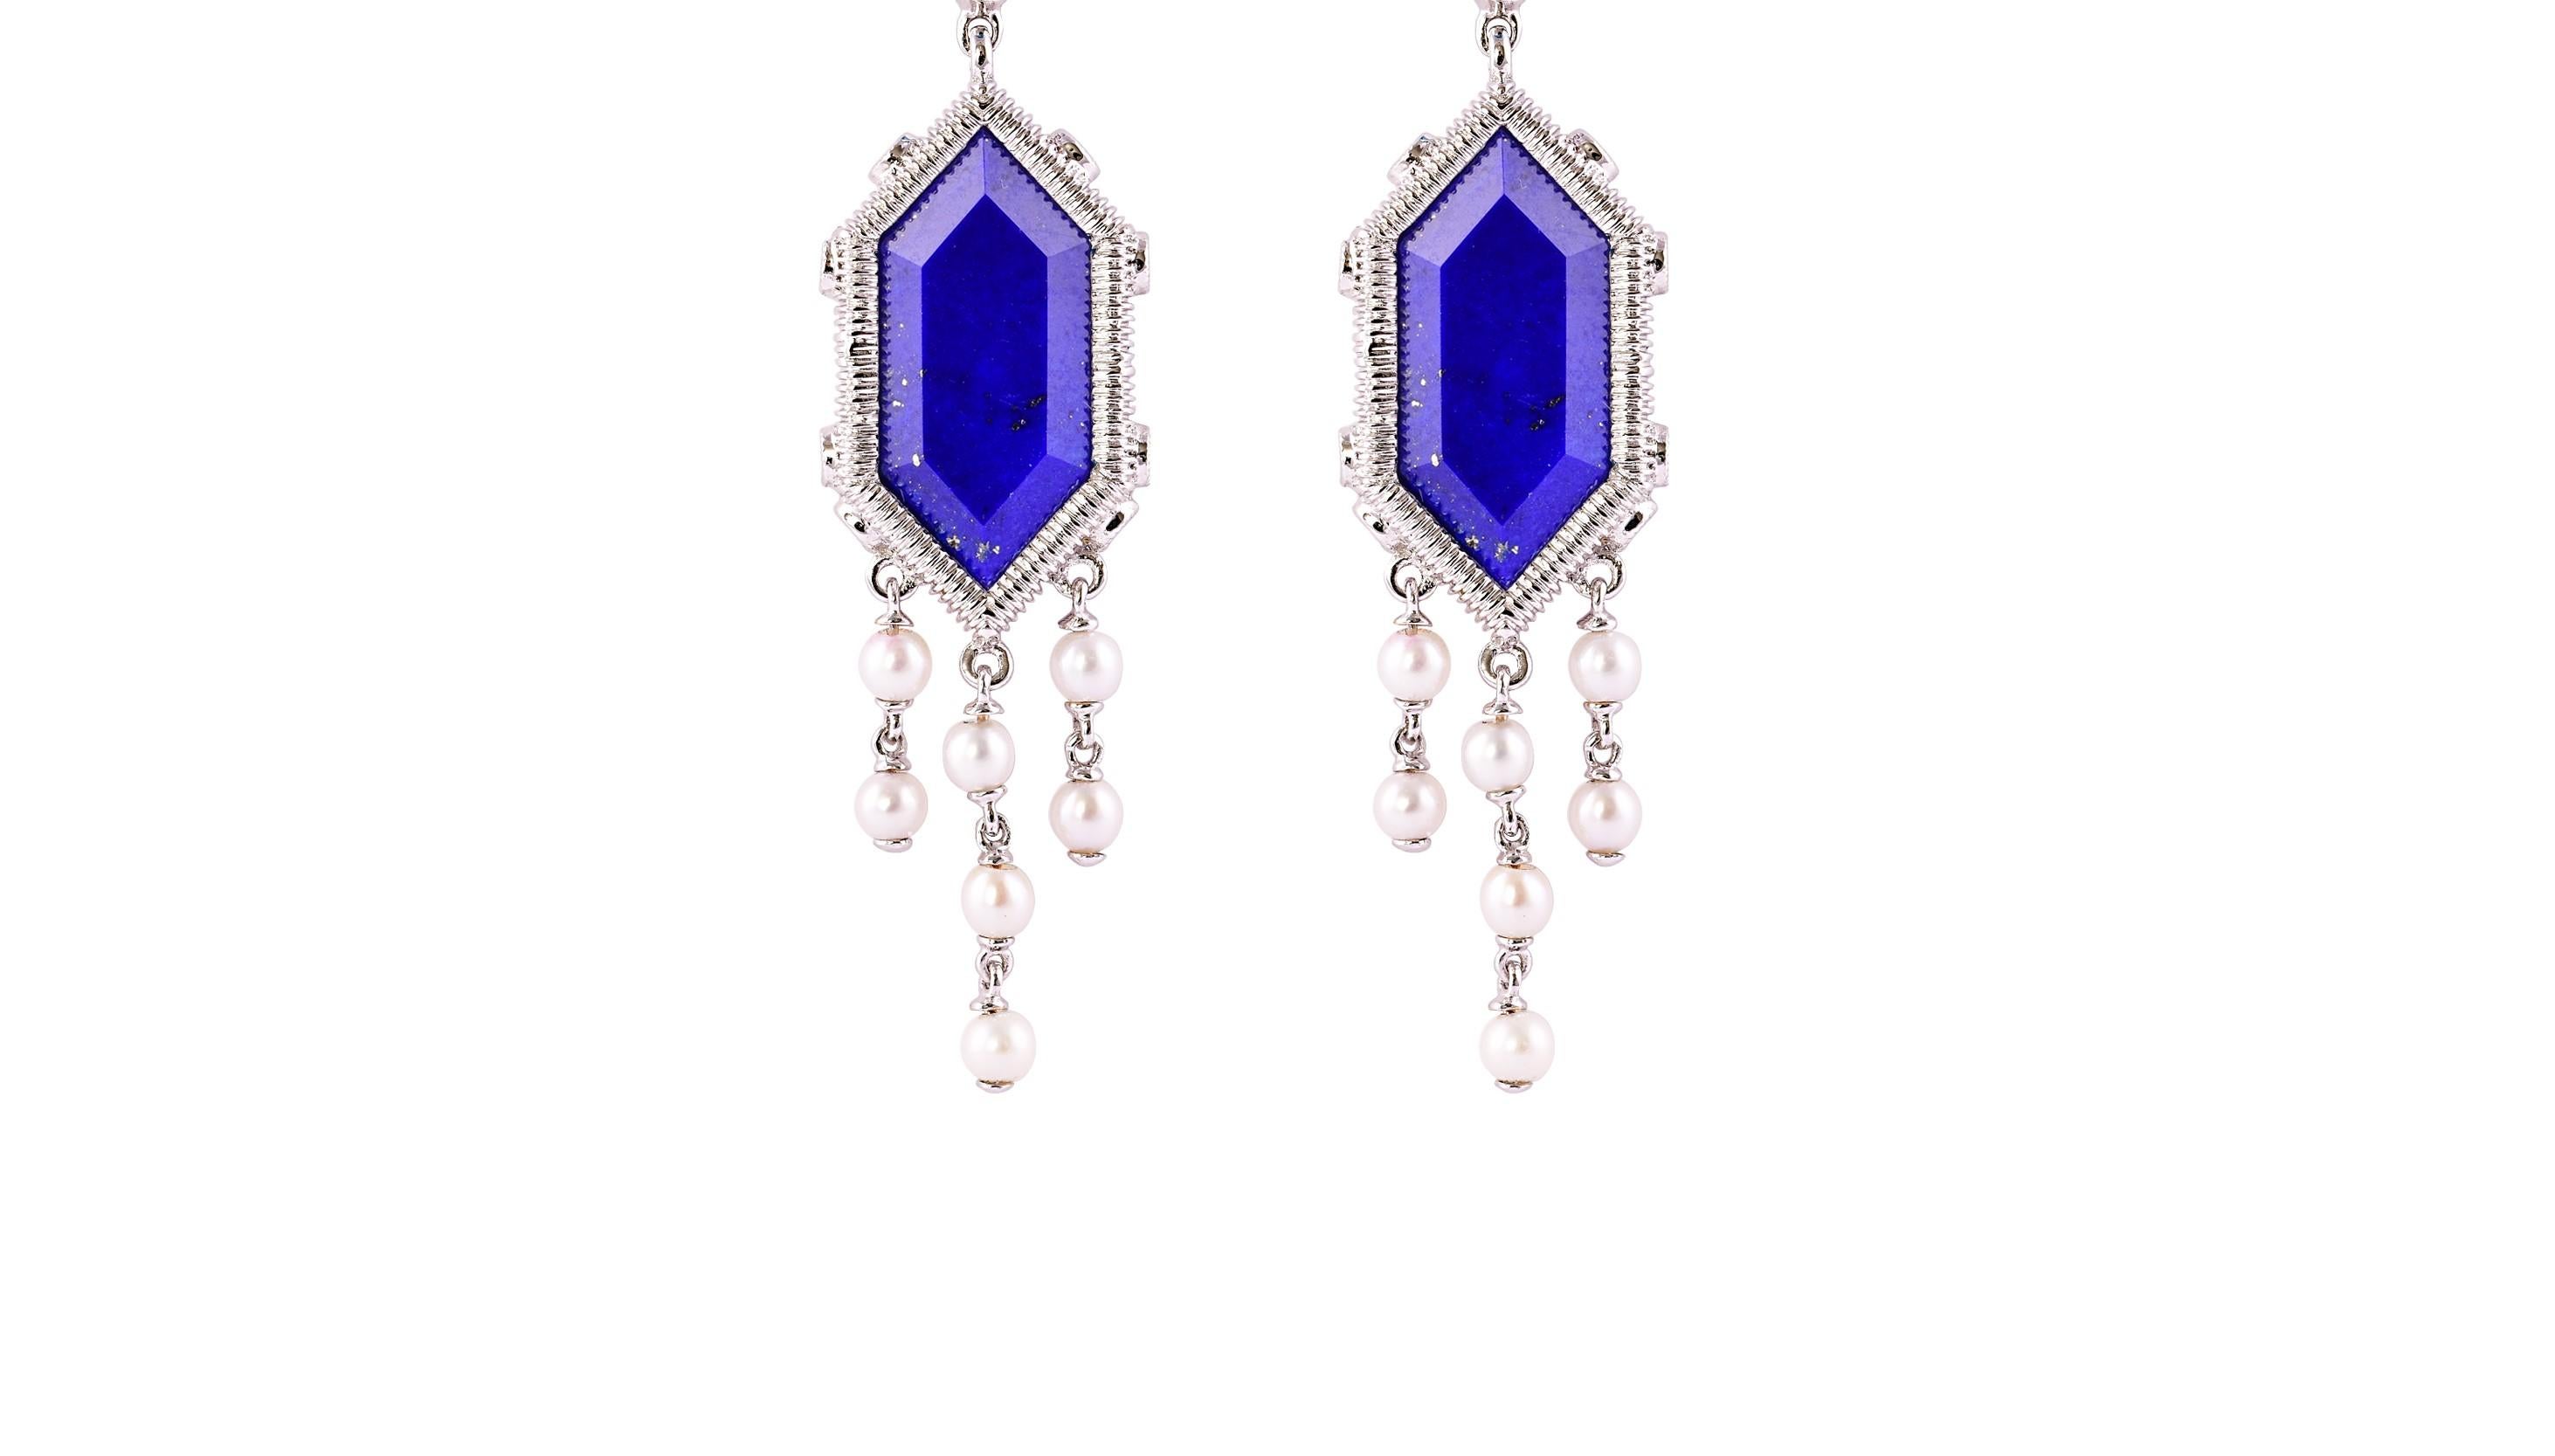 Contemporary 17.1 Carat Lapis Lazuli Earring in 18 Karat White Gold with Diamonds and Pearls For Sale